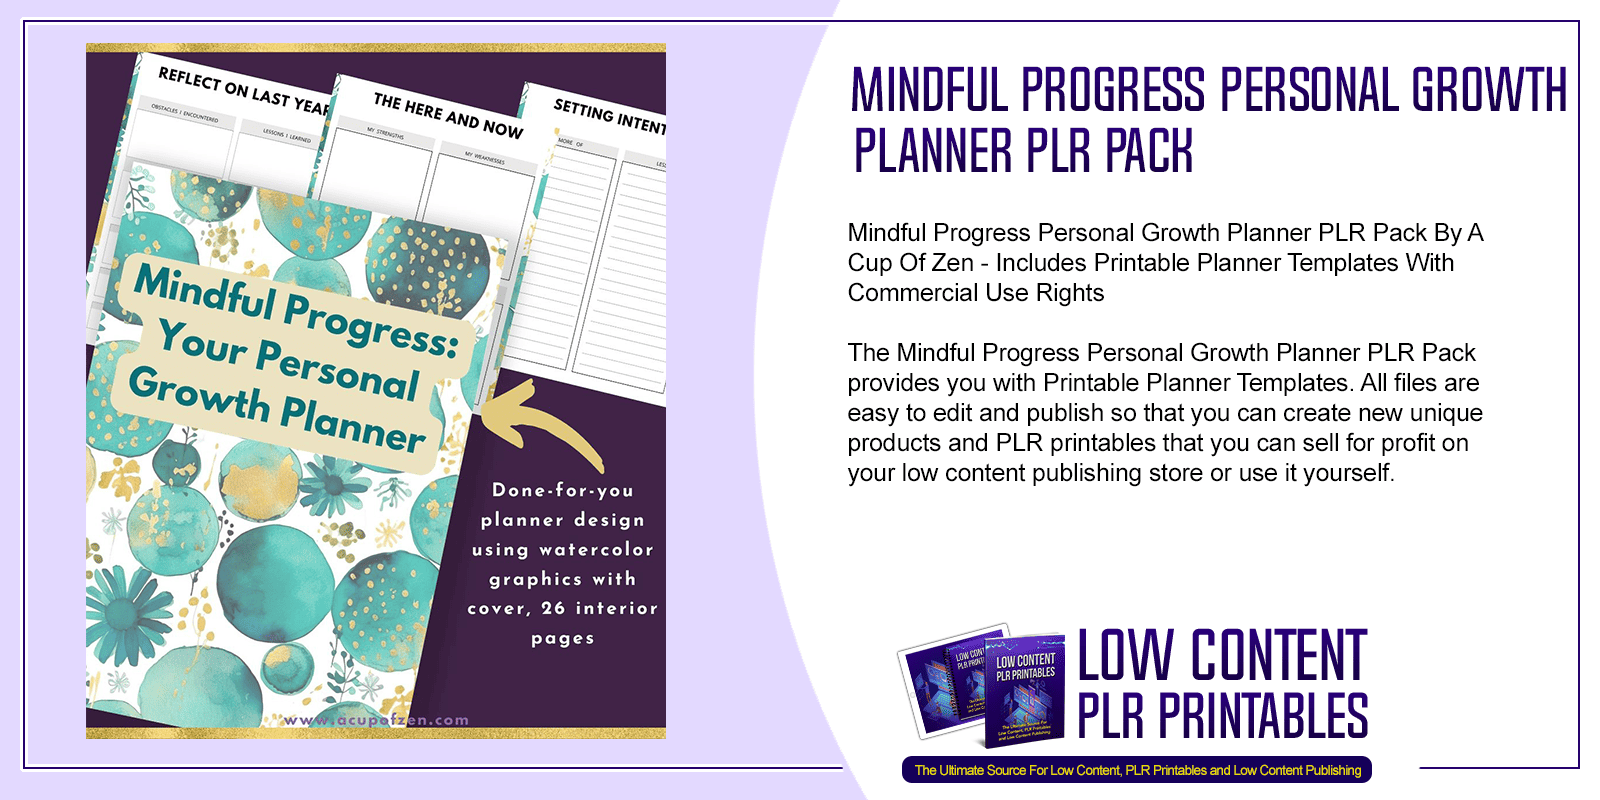 Mindful Progress Personal Growth Planner PLR Pack